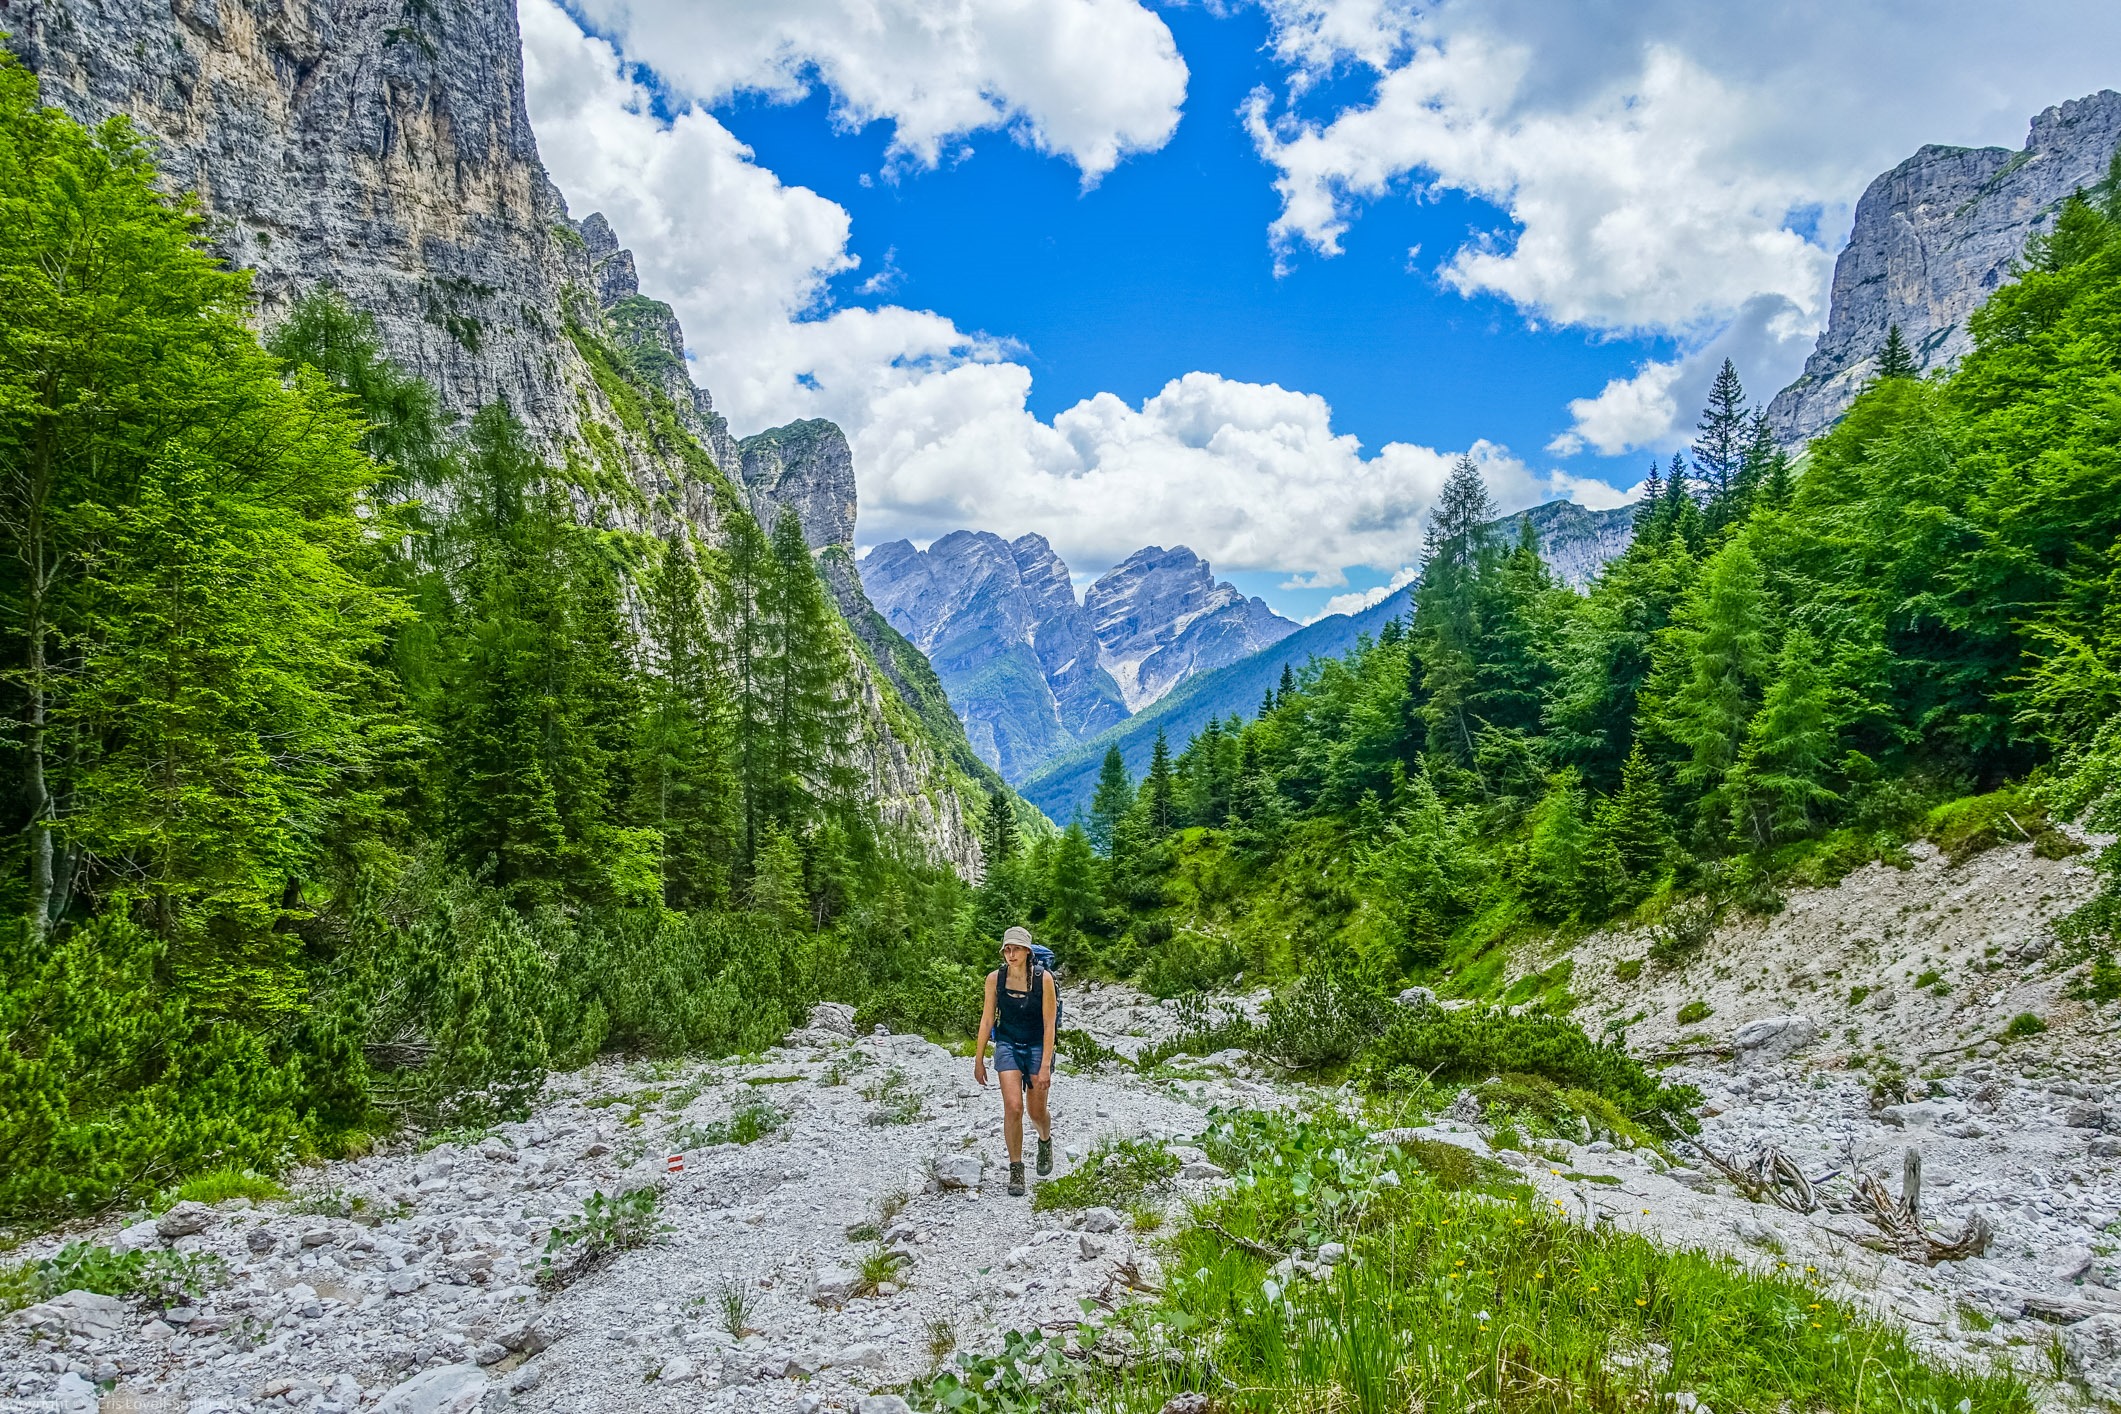 Summer Holiday 2015 –Day 5 – Walking in the dolomites